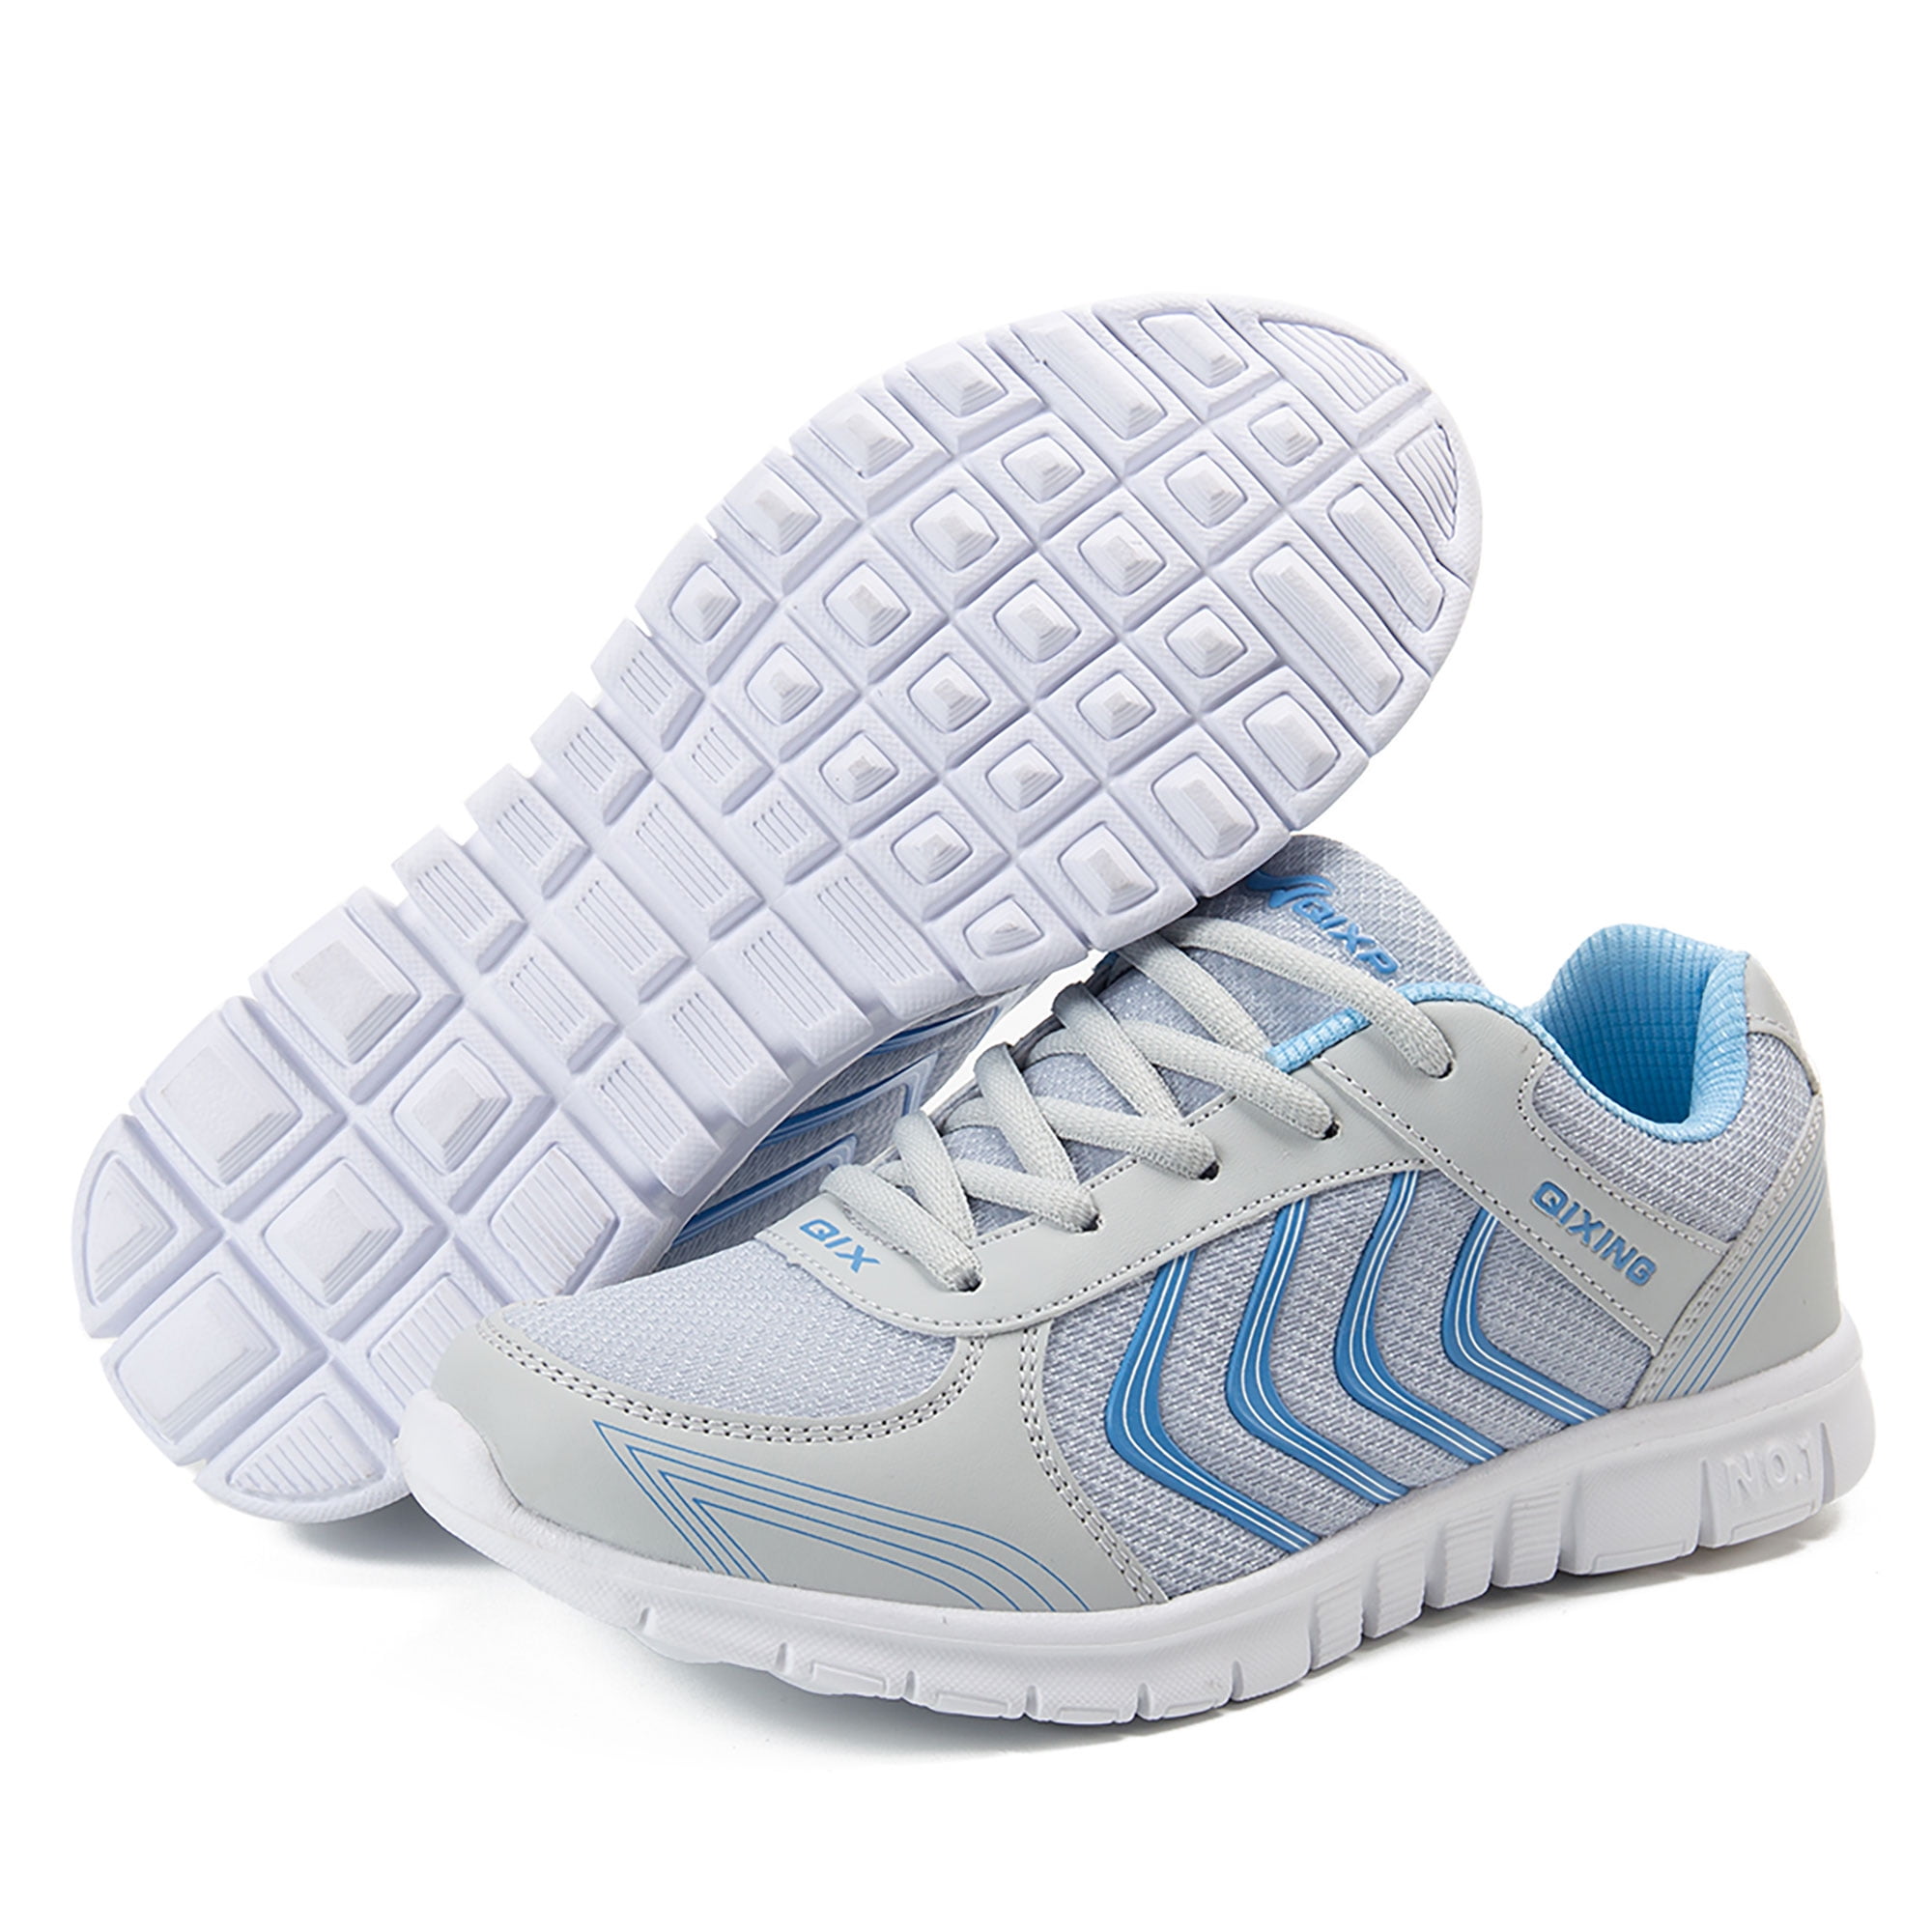 XPERSISTENCE Womens Casual Lightweight Breathable Comfortable Mesh Walking Shoes 